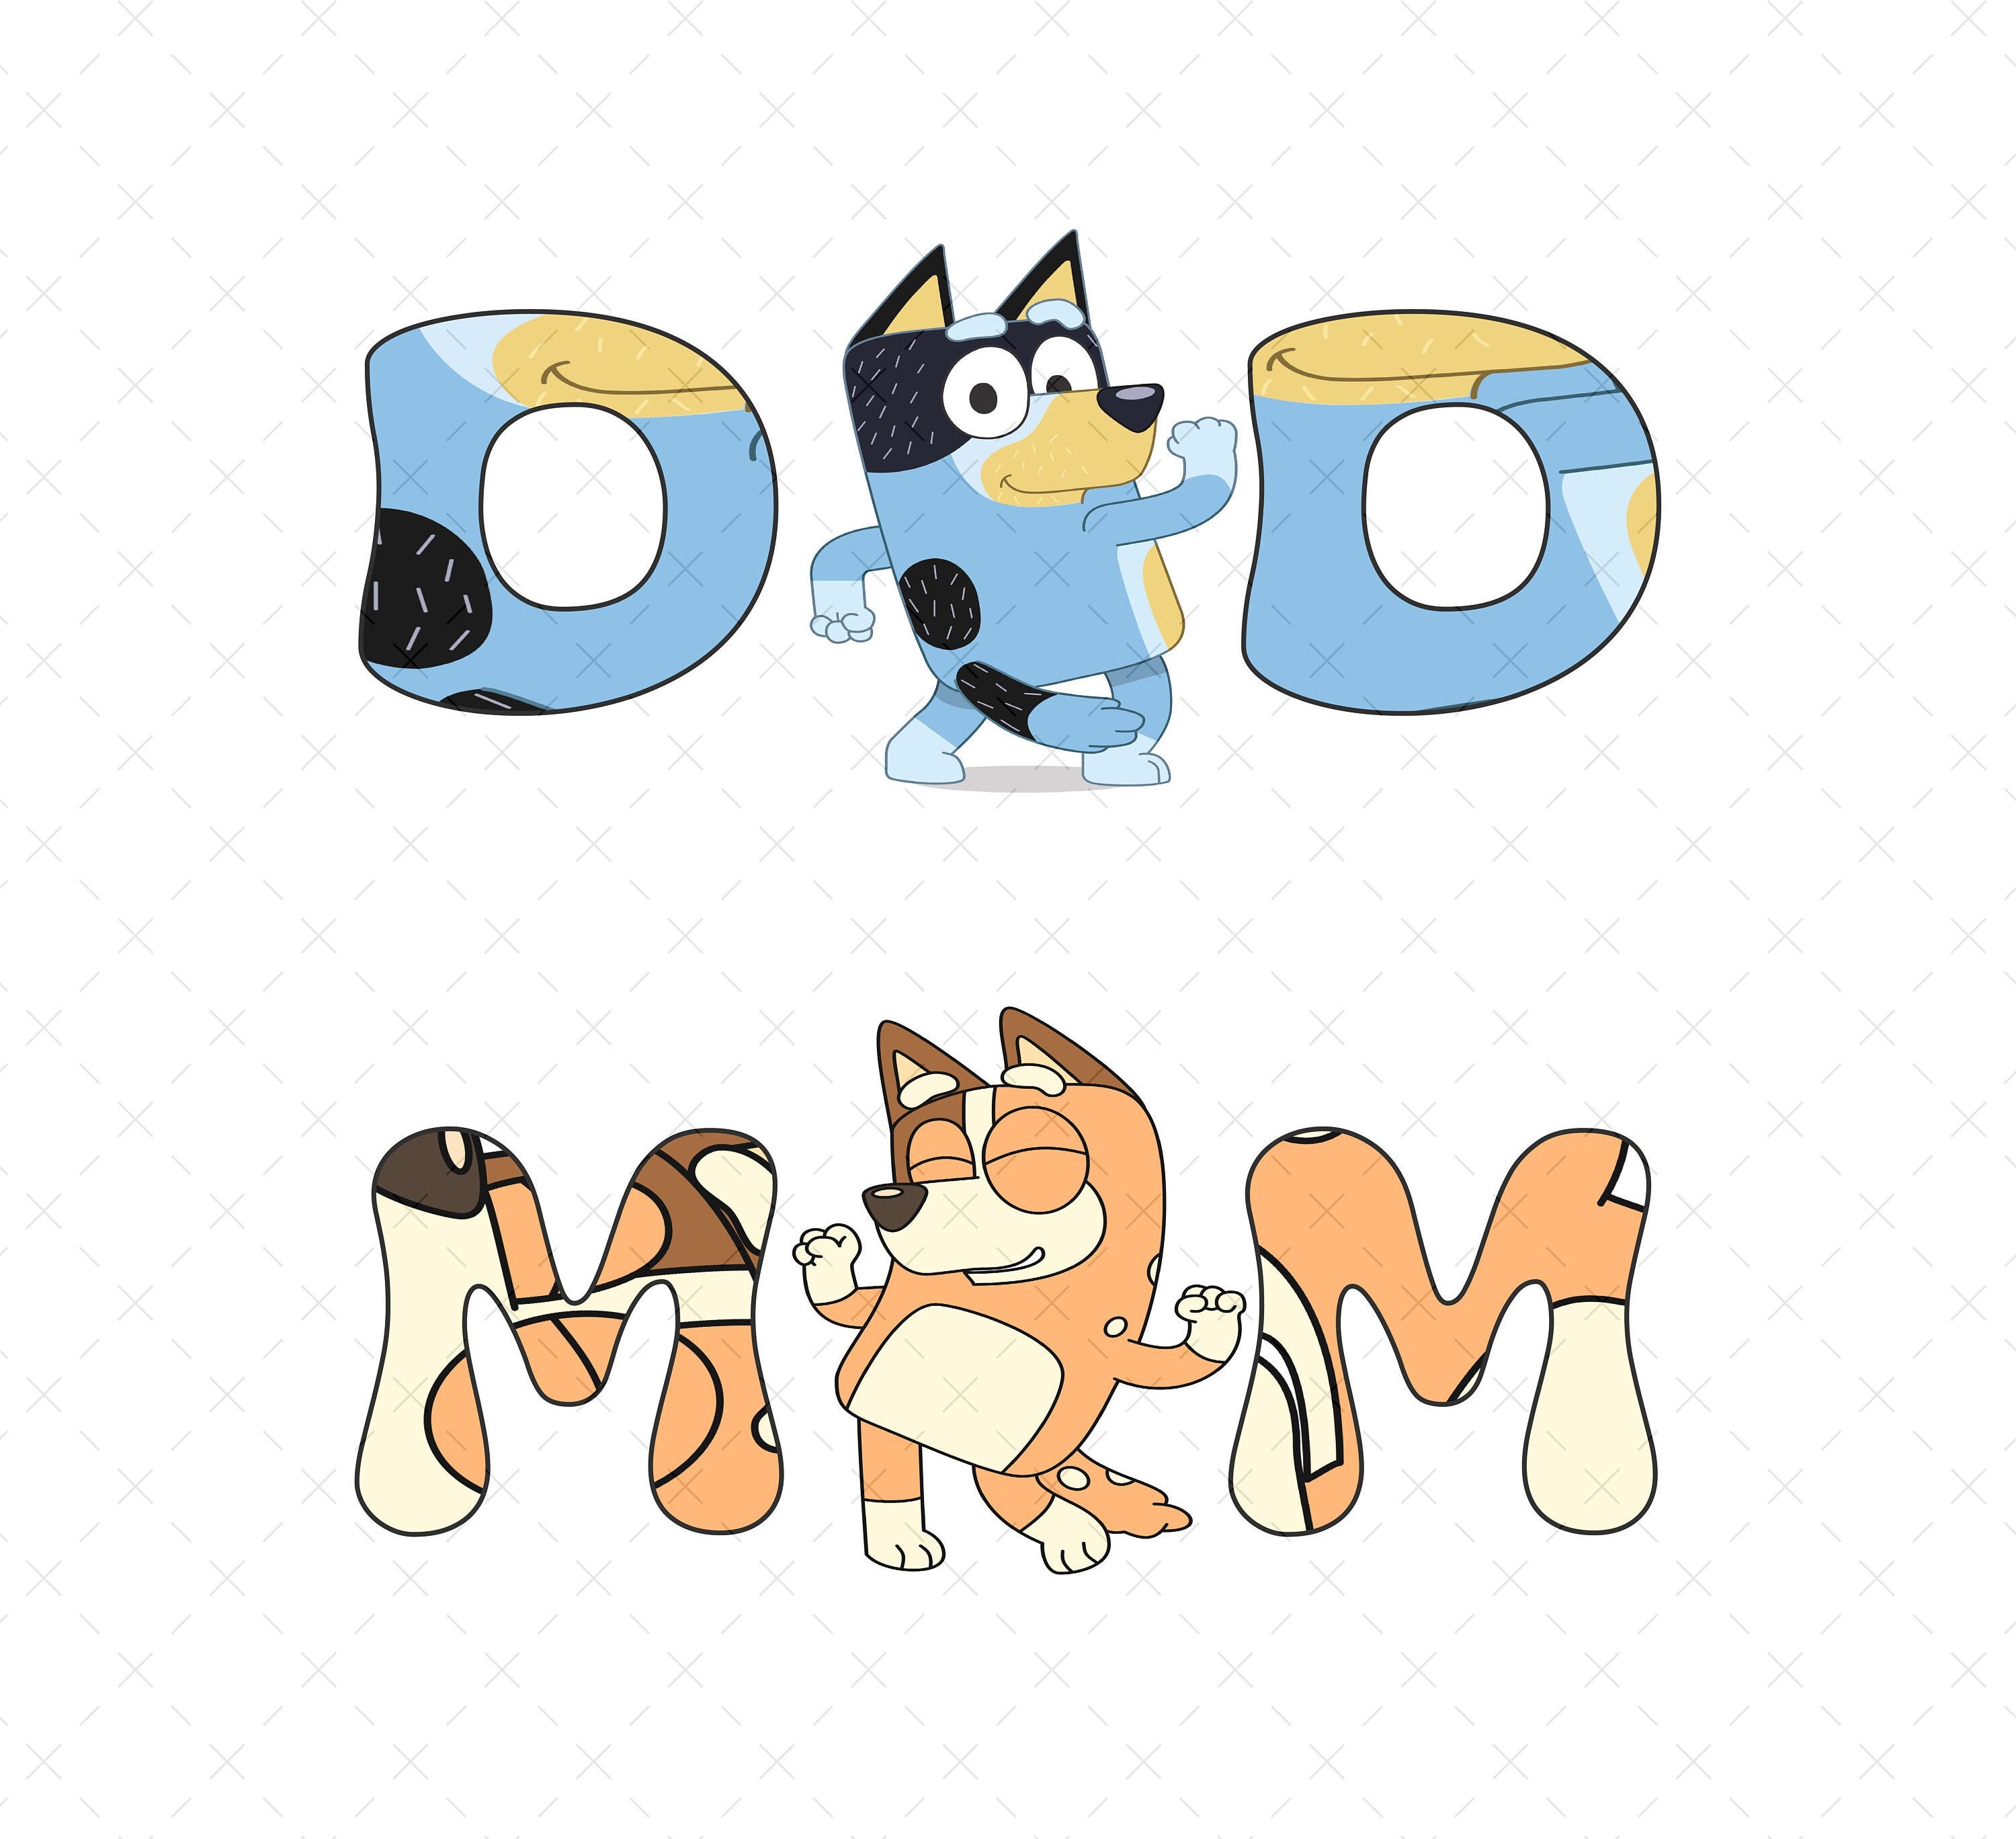 Dogs Dad Mum Png, Dogs Png, Dogs Chili Heeler Png, Dogs Mom Dad Png, Dogs Mum Dad Svg, Bandit Dad Png, Mum Svg, Mum Png, Dad Svg, Dad Png